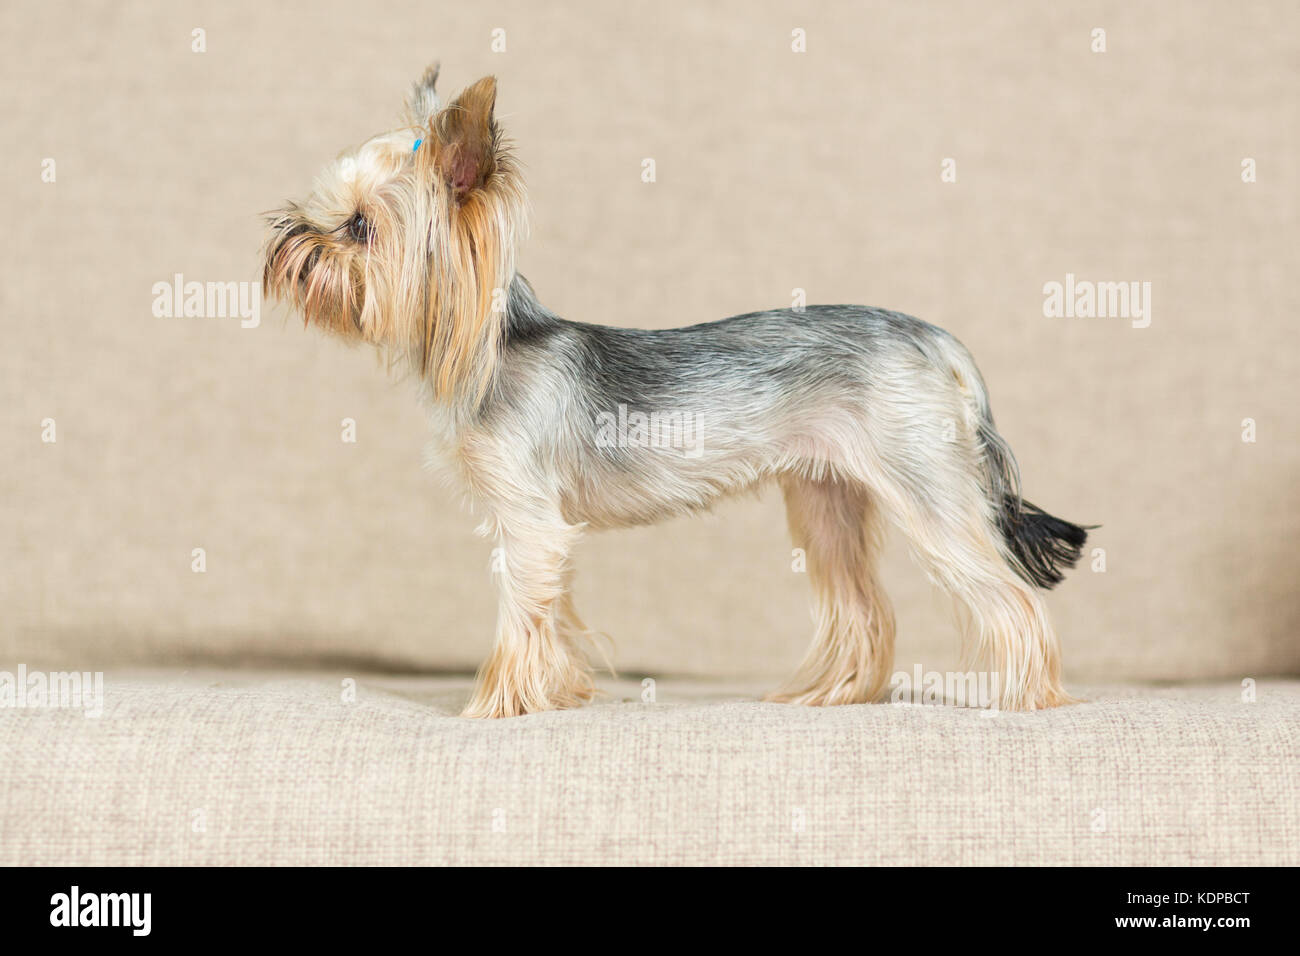 do yorkshire terriers need haircuts